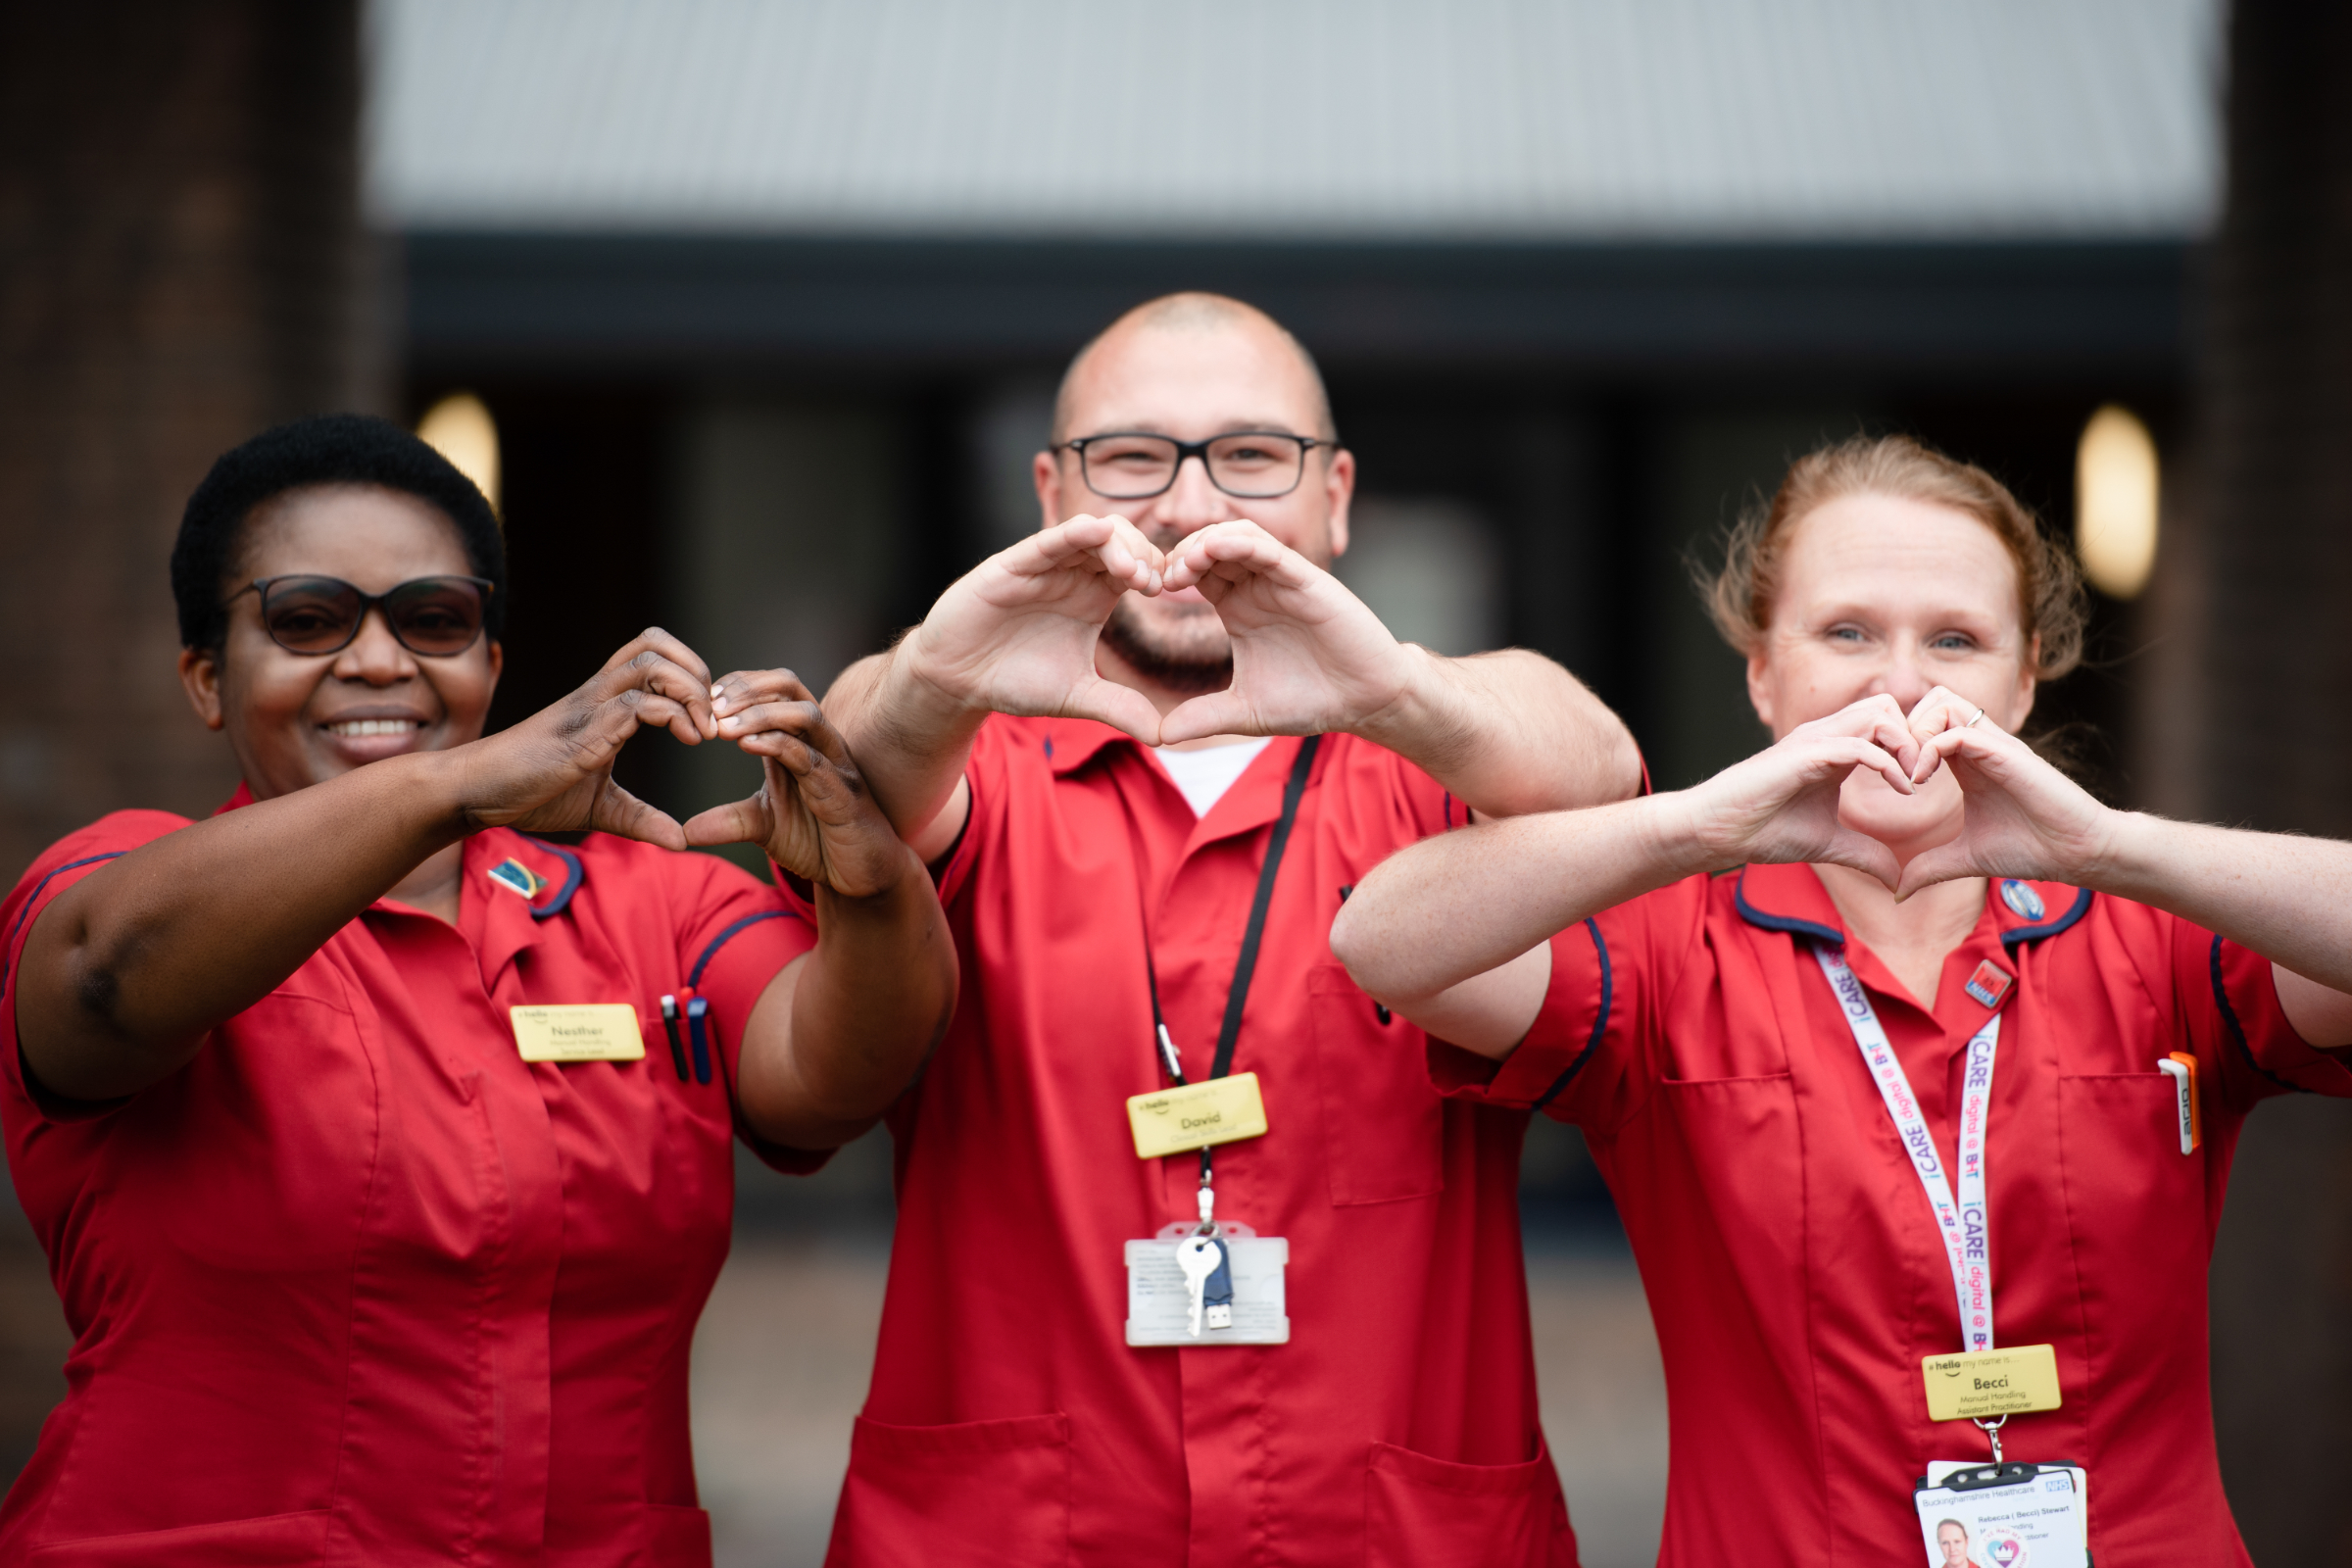 Three members of staff at SToke Mandeville Hospital; a black woman, a white ma wearing glasses and a white woman. They are all wearing red scrubs and making a heart shape with their hands.